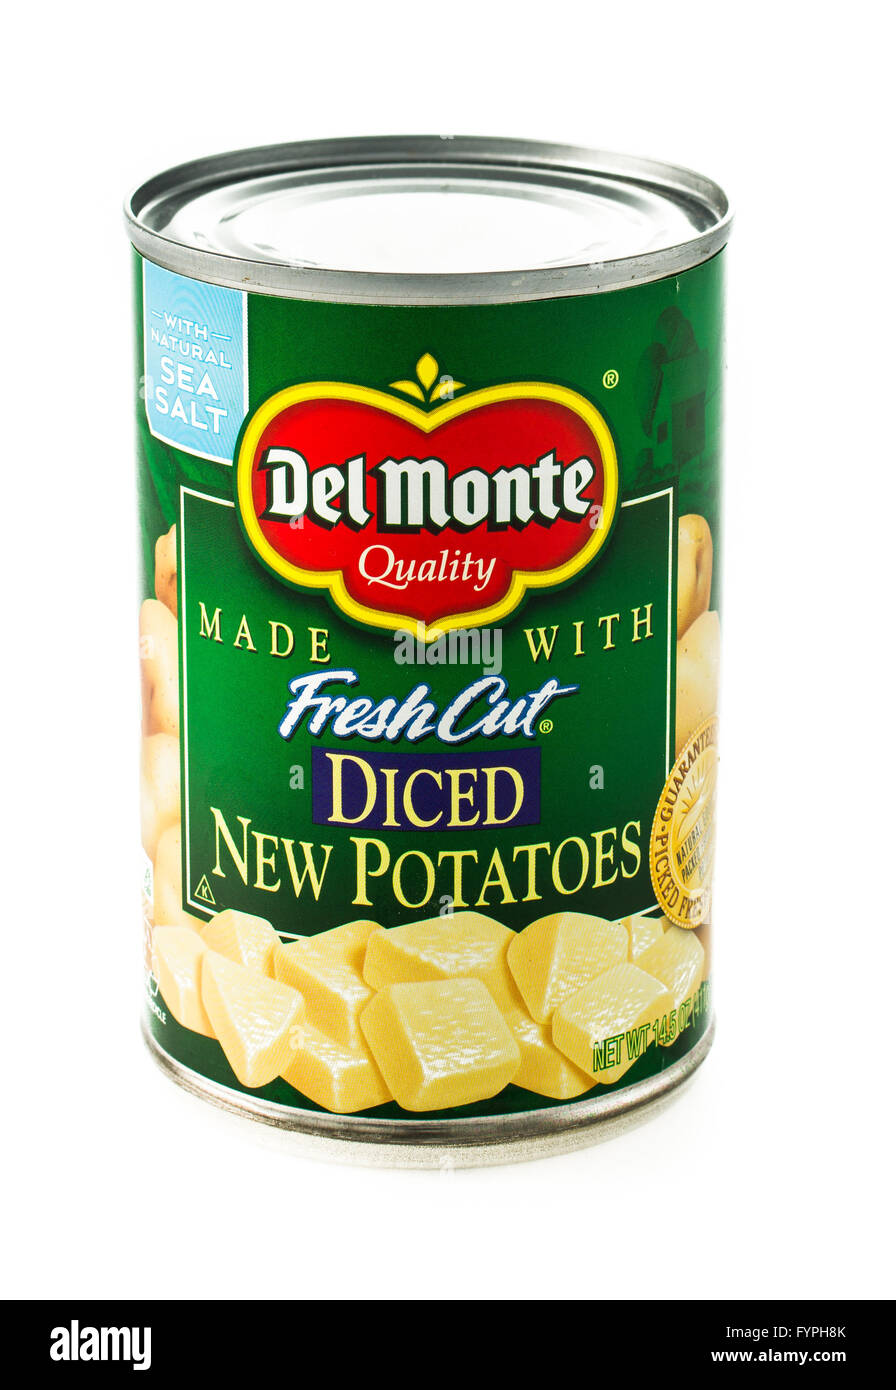 Winneconne, WI - 29 Janurary 2015:  Can of Del Monte Fresh Cut diced new potatoes.  Del Monte is one of the country's largest fo Stock Photo